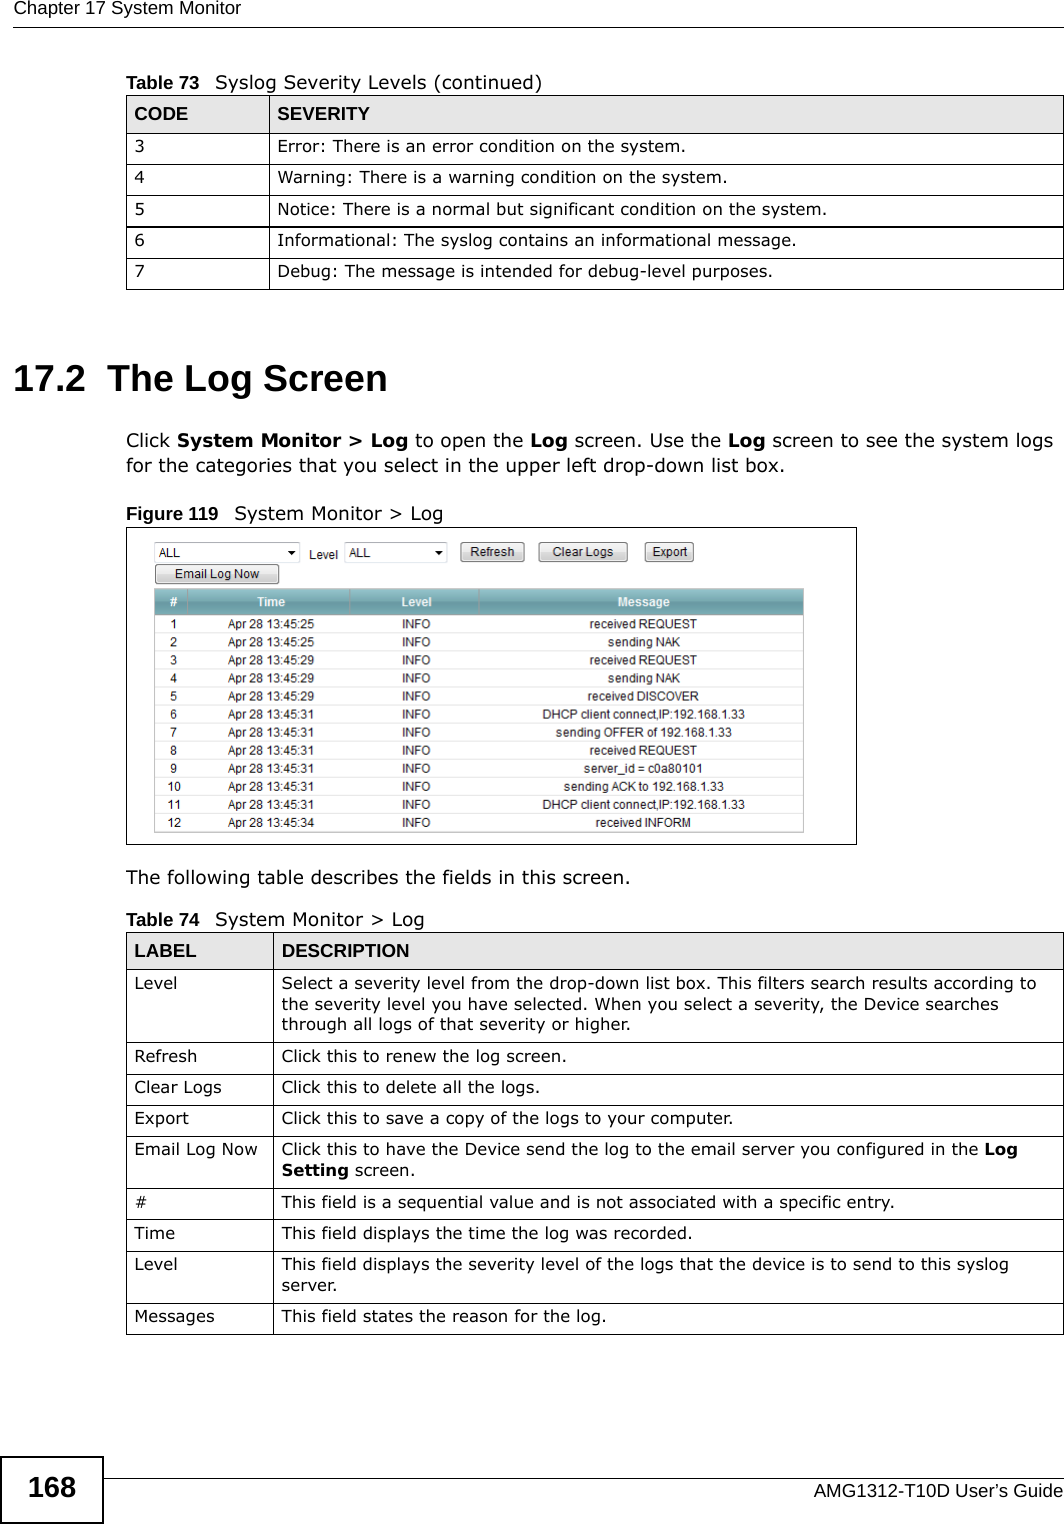 Chapter 17 System MonitorAMG1312-T10D User’s Guide16817.2  The Log Screen Click System Monitor &gt; Log to open the Log screen. Use the Log screen to see the system logs for the categories that you select in the upper left drop-down list box. Figure 119   System Monitor &gt; Log The following table describes the fields in this screen.  3 Error: There is an error condition on the system.4 Warning: There is a warning condition on the system.5 Notice: There is a normal but significant condition on the system.6 Informational: The syslog contains an informational message.7 Debug: The message is intended for debug-level purposes.Table 73   Syslog Severity Levels (continued)CODE SEVERITYTable 74   System Monitor &gt; LogLABEL DESCRIPTIONLevel  Select a severity level from the drop-down list box. This filters search results according to the severity level you have selected. When you select a severity, the Device searches through all logs of that severity or higher. Refresh Click this to renew the log screen. Clear Logs  Click this to delete all the logs. Export Click this to save a copy of the logs to your computer.Email Log Now Click this to have the Device send the log to the email server you configured in the Log Setting screen.# This field is a sequential value and is not associated with a specific entry.Time  This field displays the time the log was recorded. Level This field displays the severity level of the logs that the device is to send to this syslog server.Messages This field states the reason for the log.